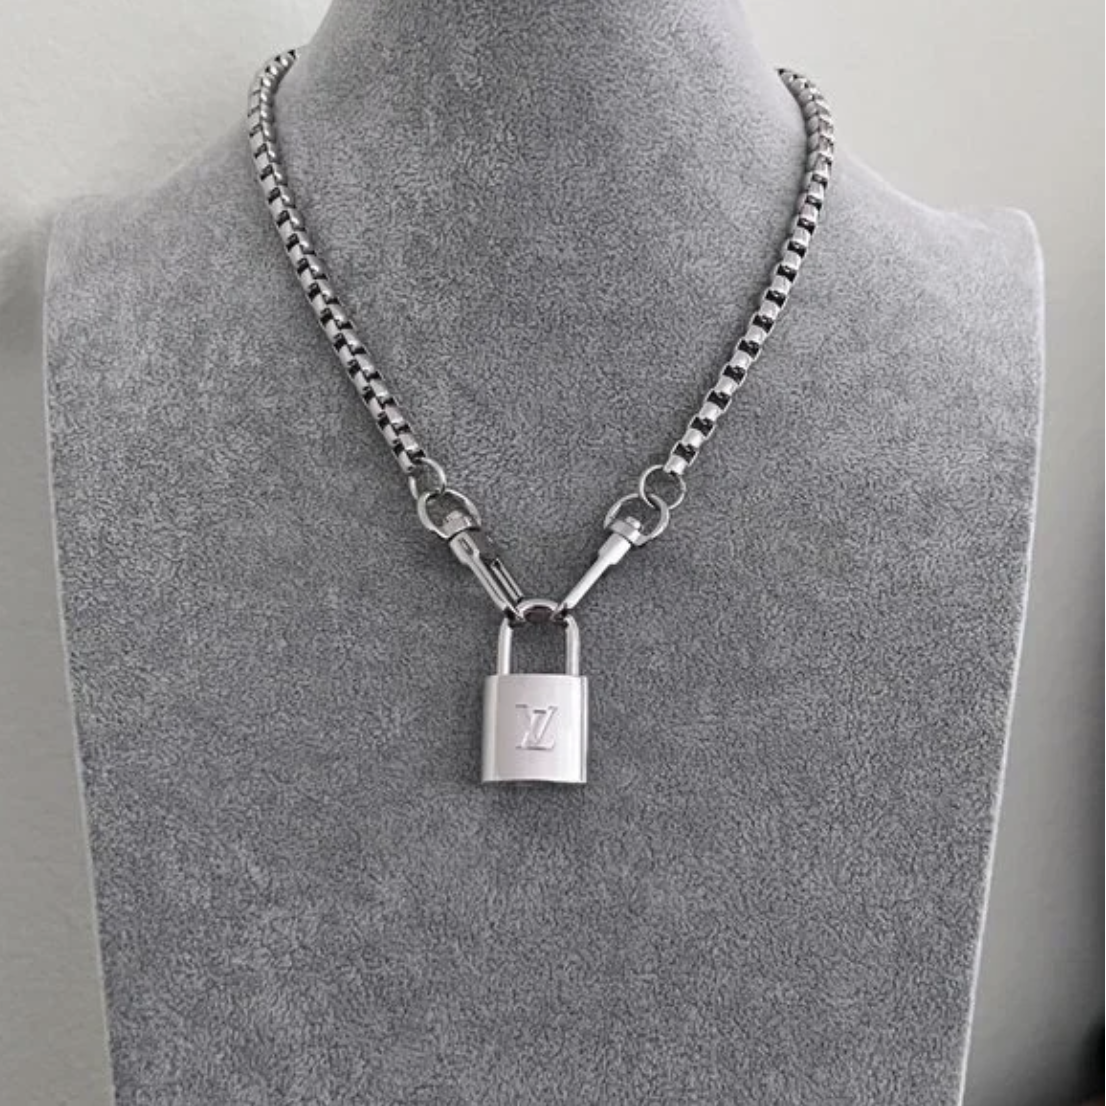 Primary image for New Louis Vuitton Silver-Toned Lock with 18" Box Link Chain Necklace